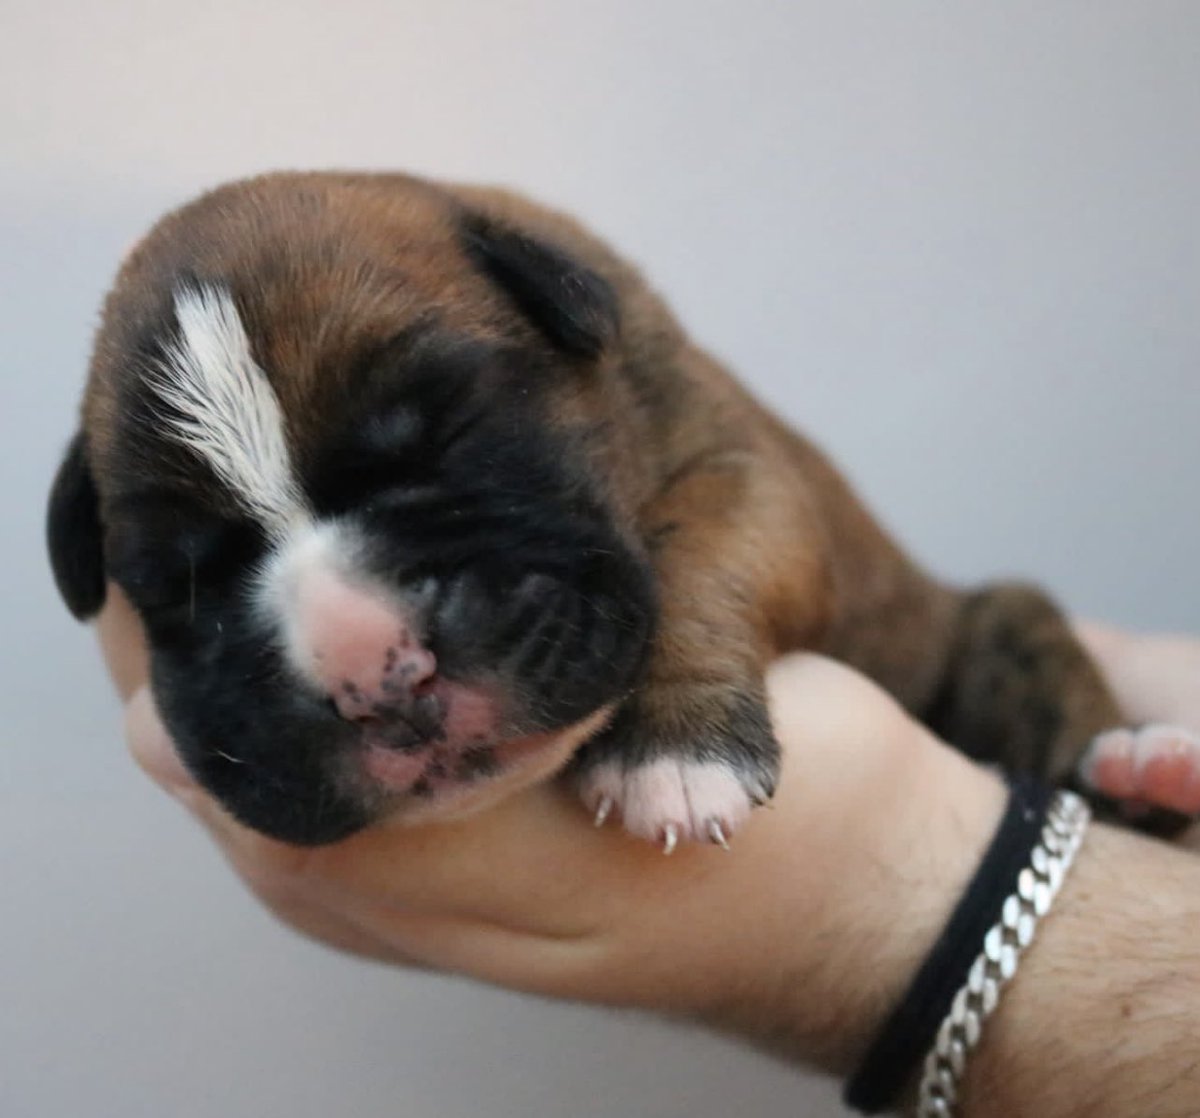 This is Mabel. Just over a week old at the moment. She’ll be coming home when she’s old enough. #Boxerdog ❤️